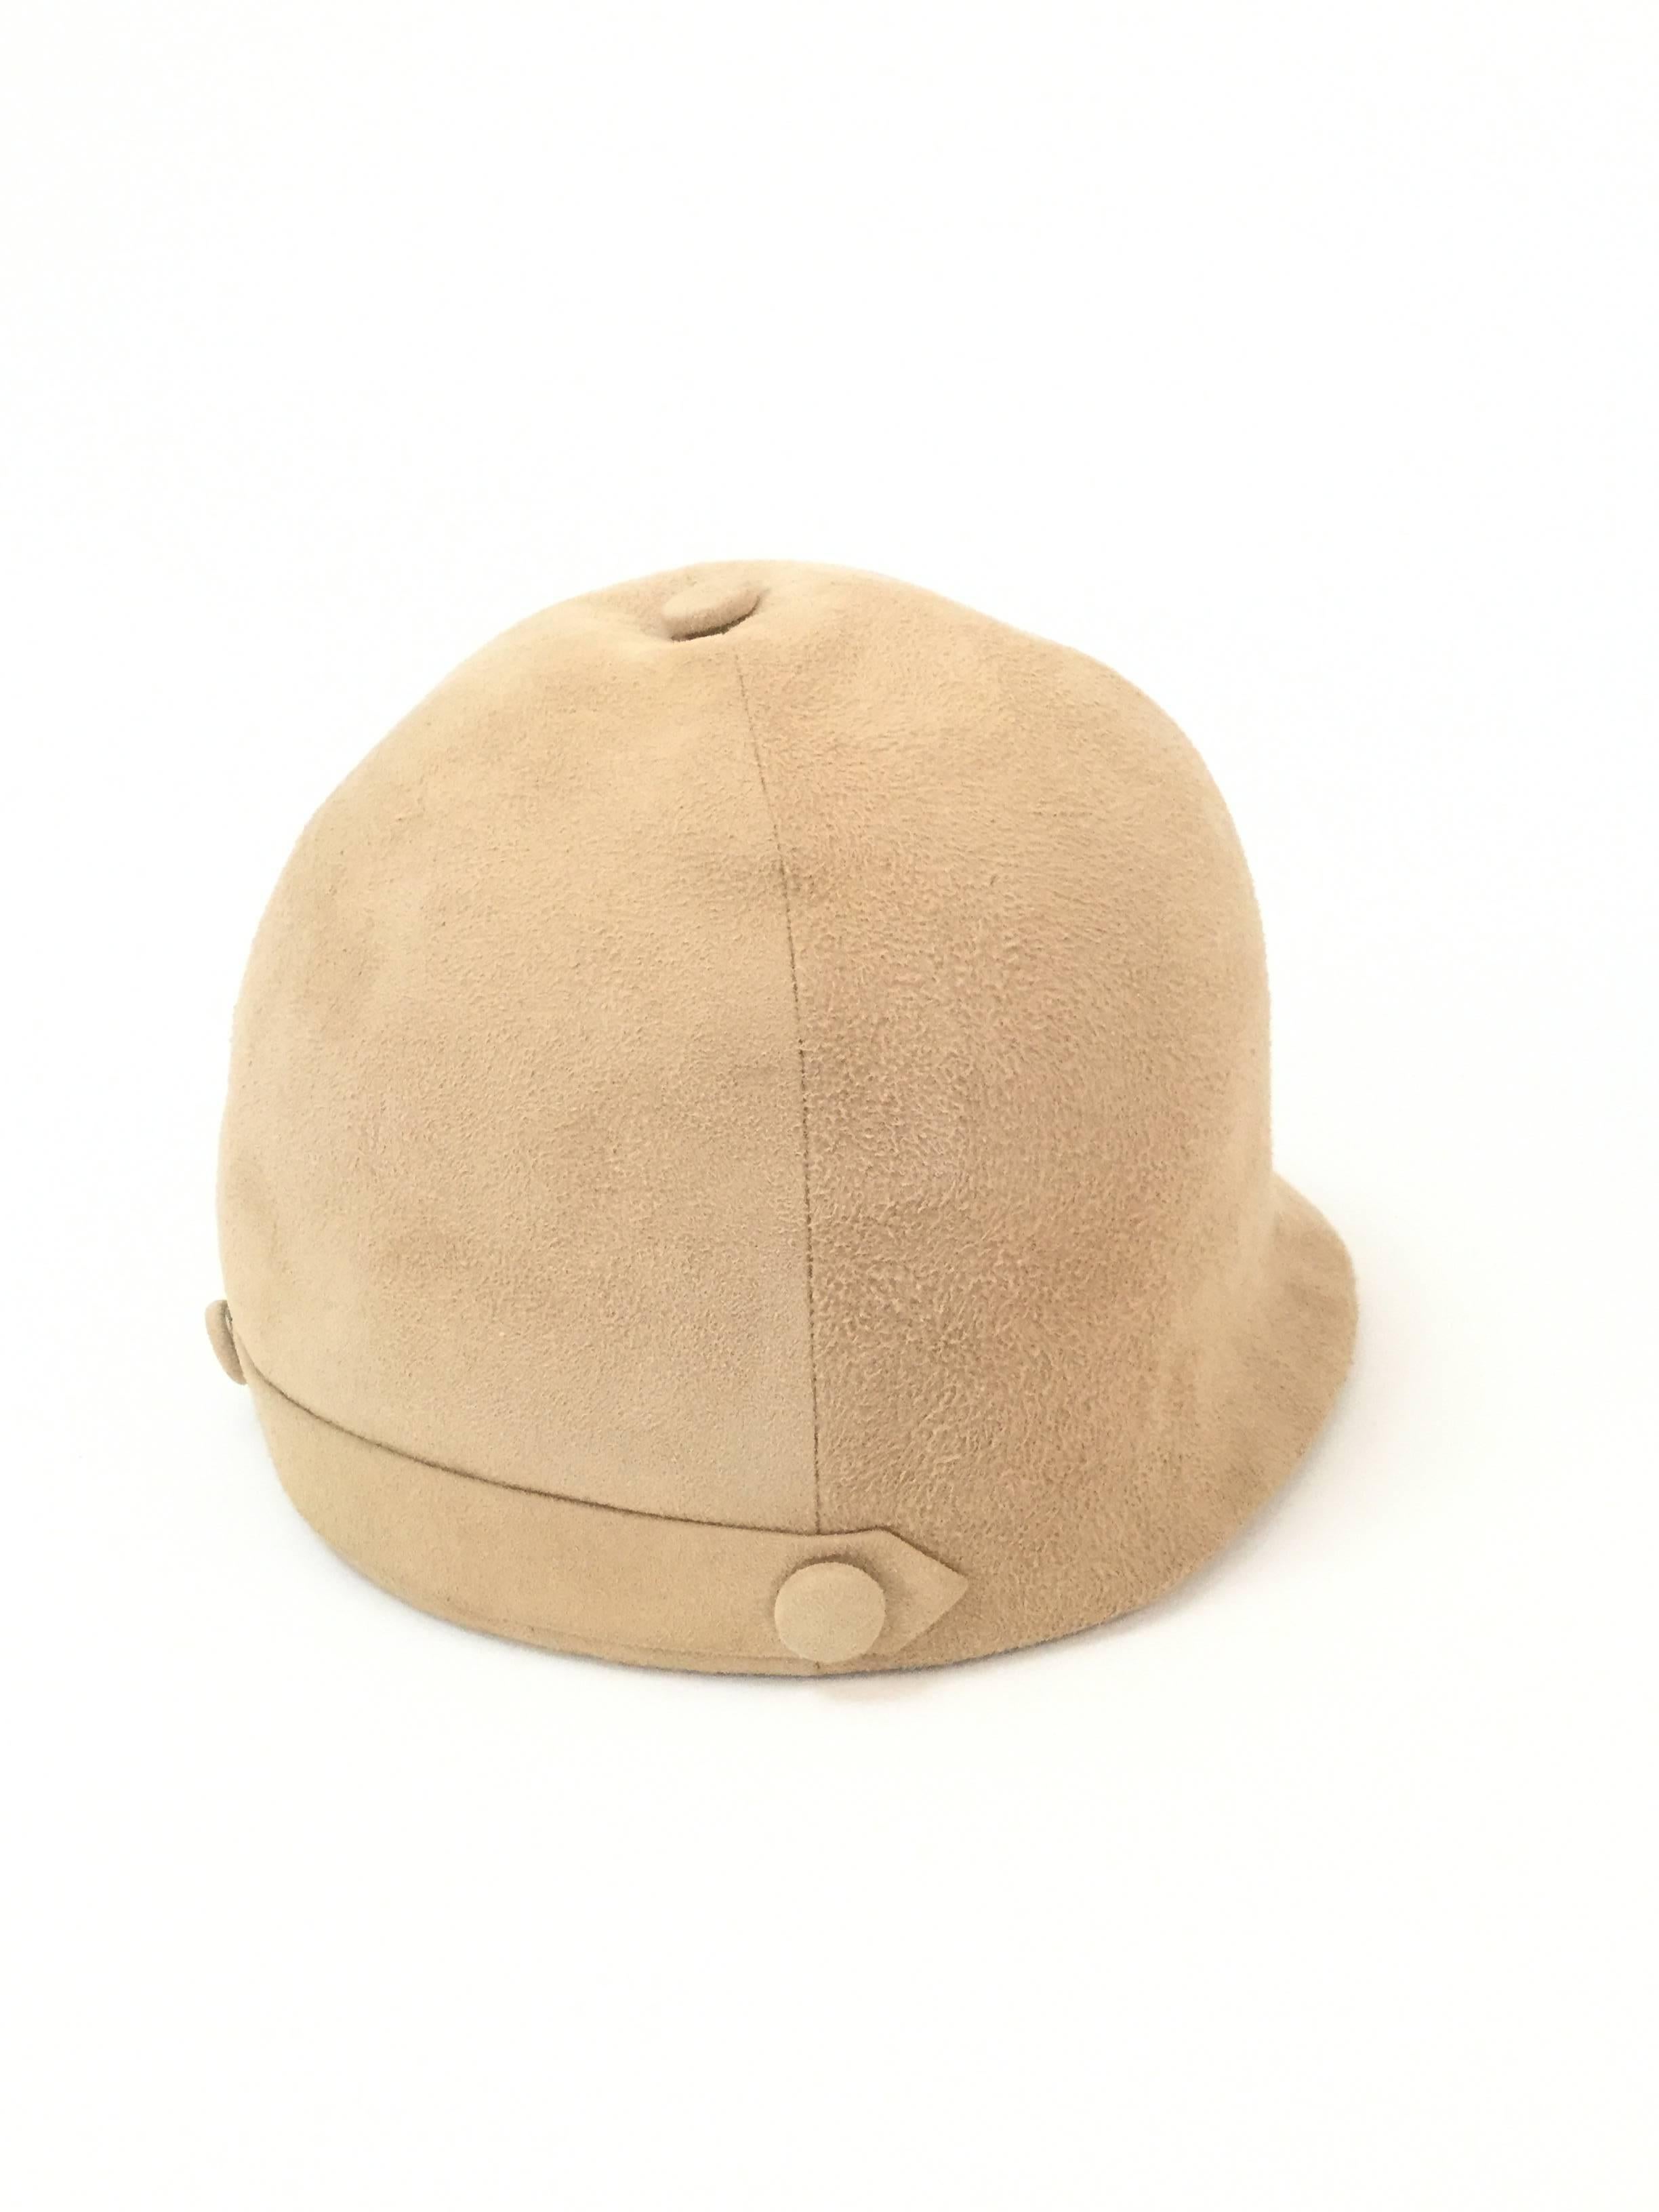 Women's or Men's Camel Colored Suede Equestrian Hat, 1960s  For Sale